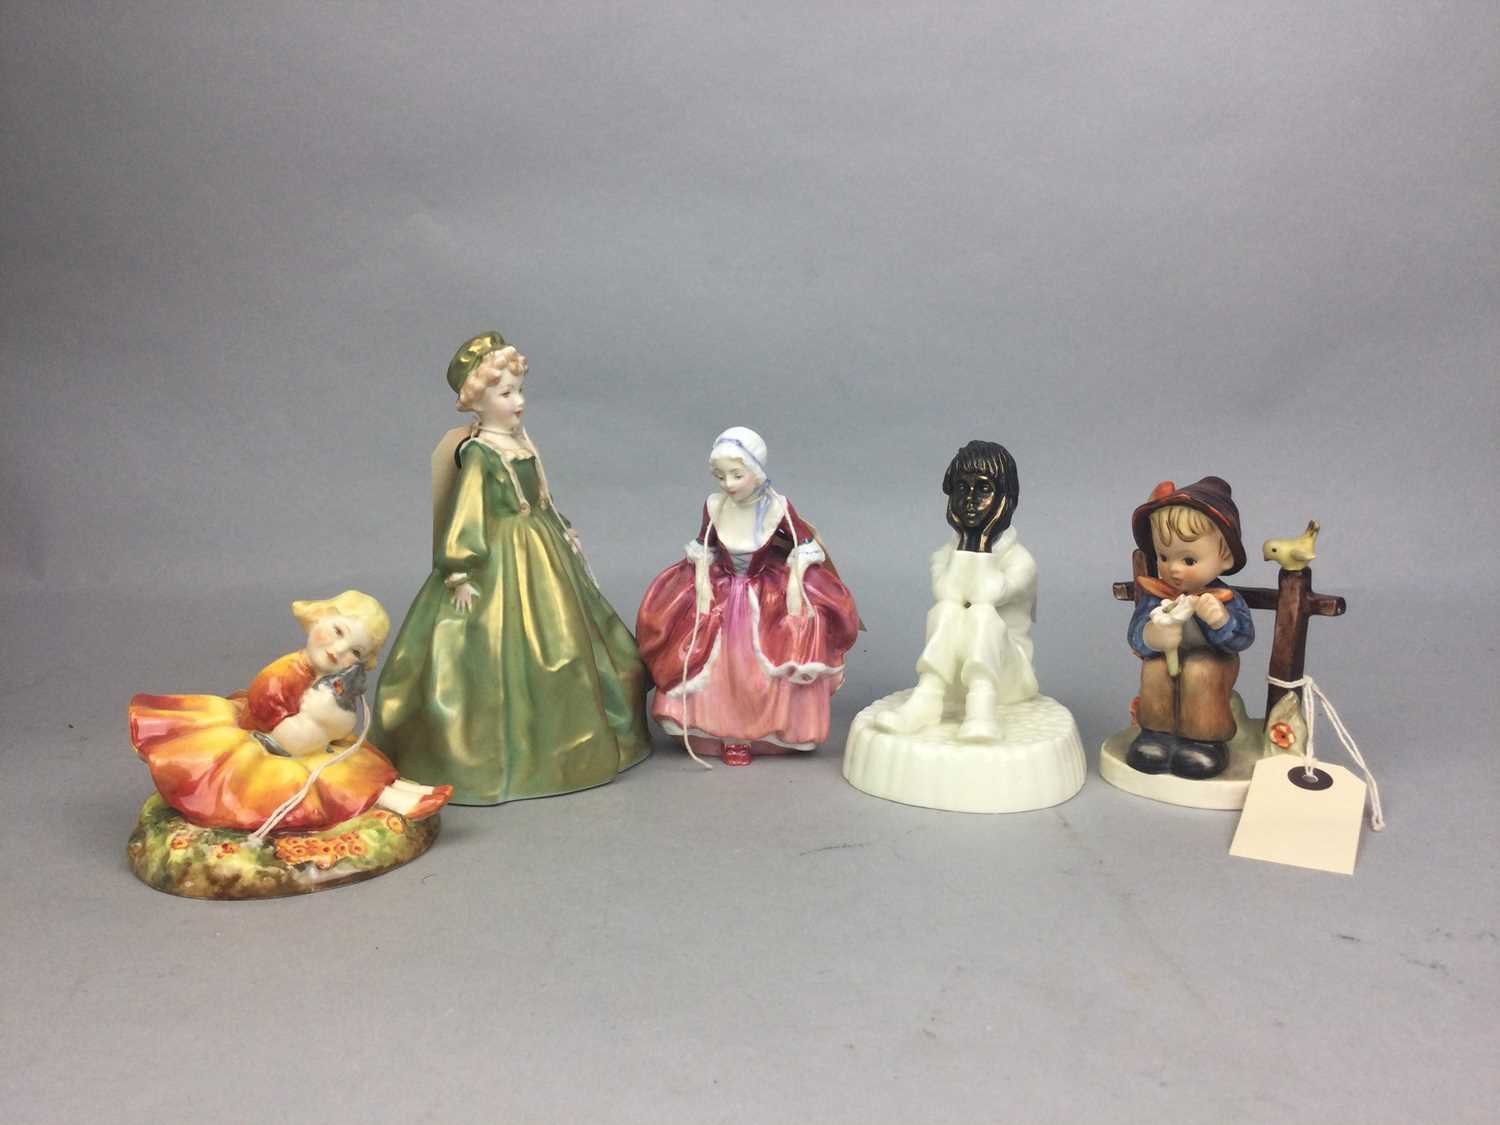 Lot 47 - A ROYAL DOULTON FIGURE OF GOODY TWO SHOES AND TWO OTHER FIGURES